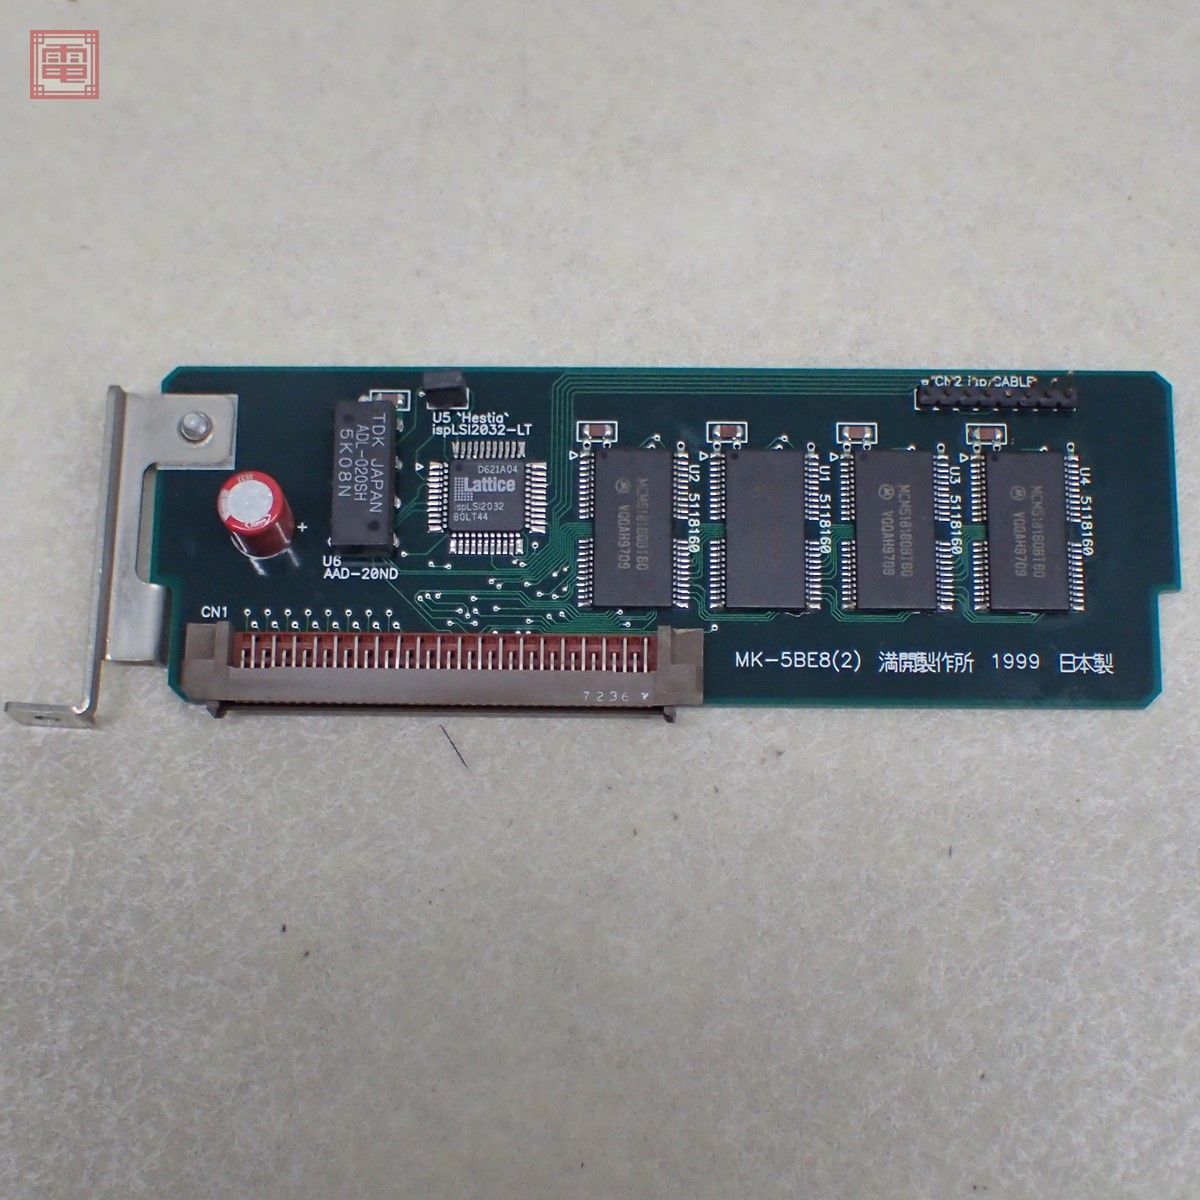 X68030 exclusive use built-in for 8M bite memory board MK-5BE8 full . factory 8MB extension RAM board operation not yet verification [10